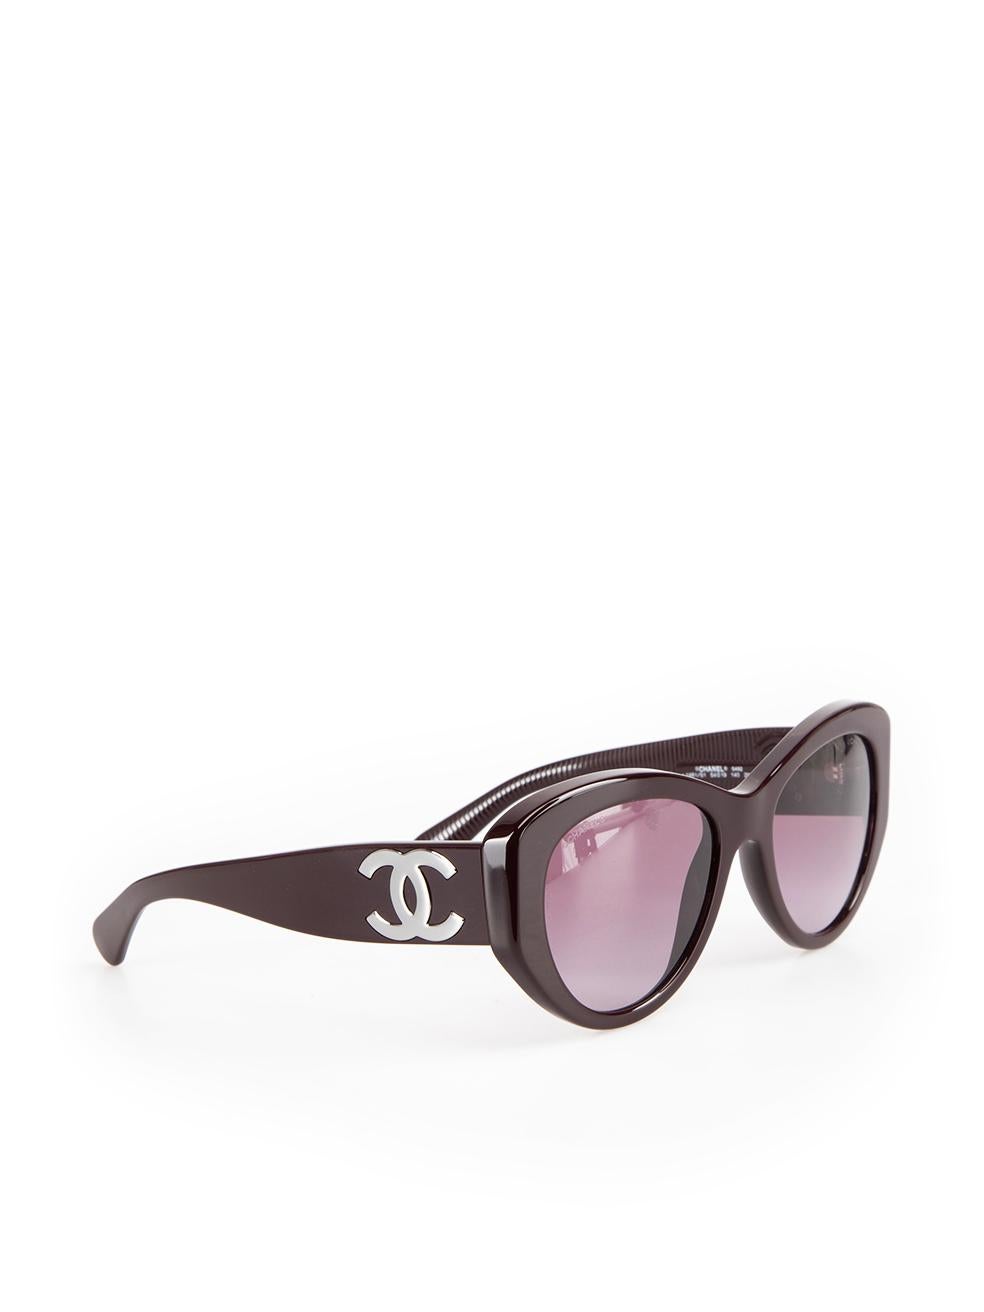 Chanel Purple Butterfly Frame Sunglasses In New Condition For Sale In London, GB